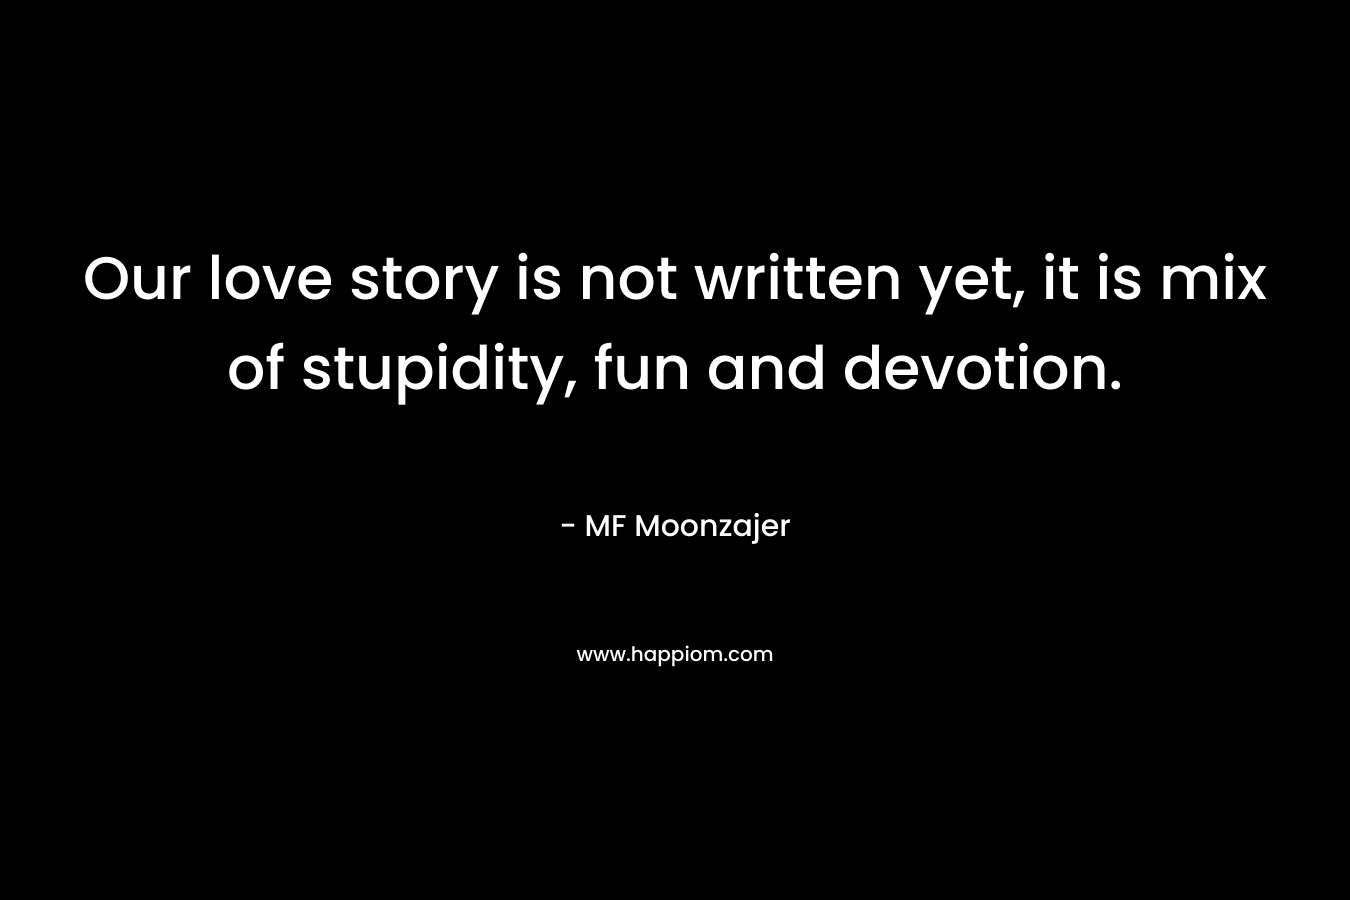 Our love story is not written yet, it is mix of stupidity, fun and devotion. – MF Moonzajer